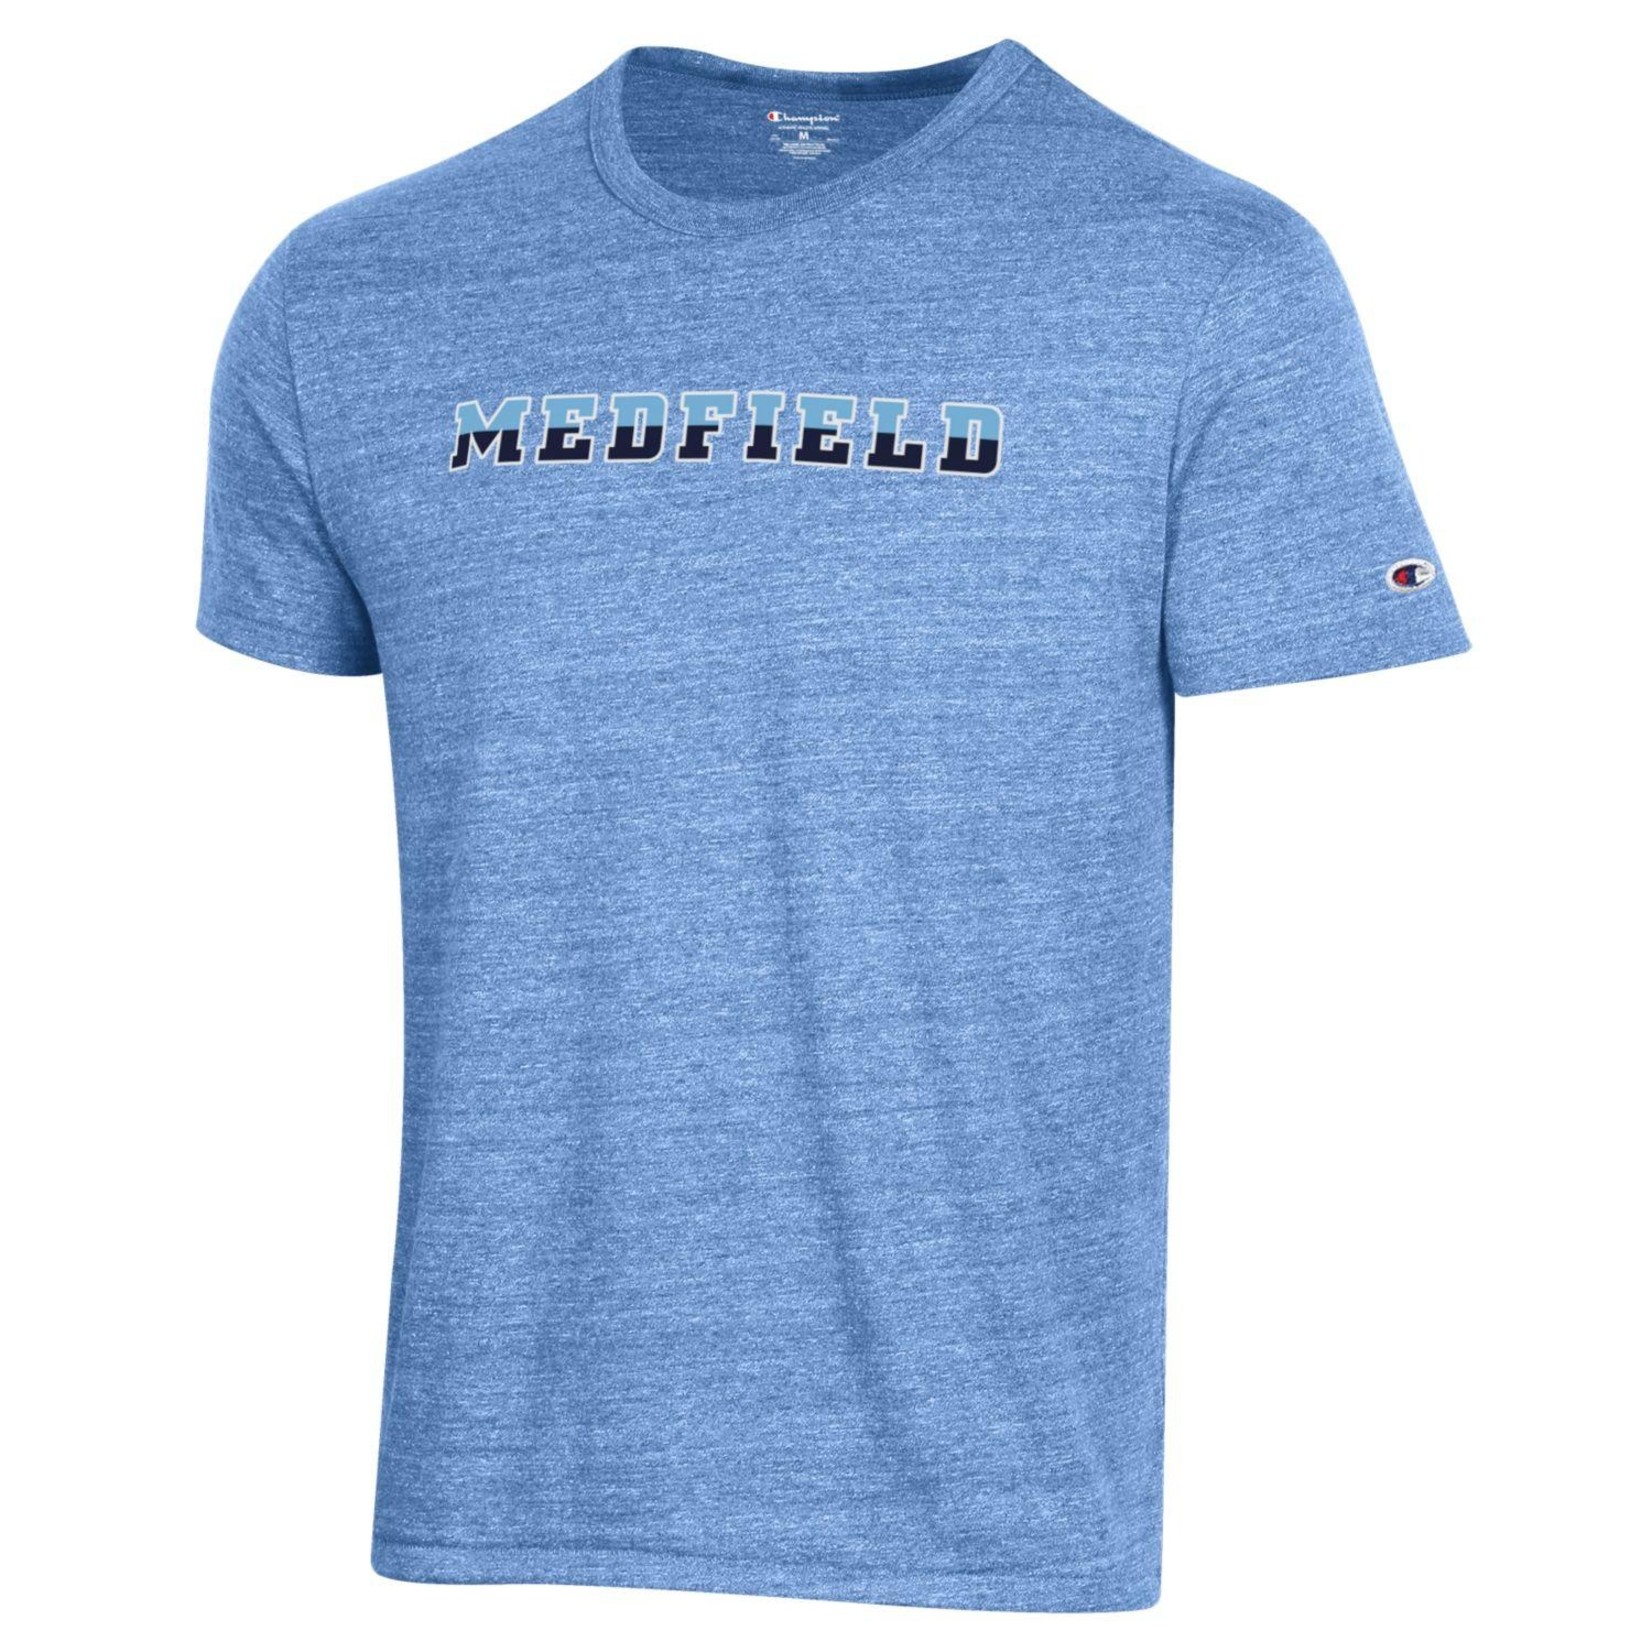 Champion - Medfield 3 Color Adult Tri-blend Tee -